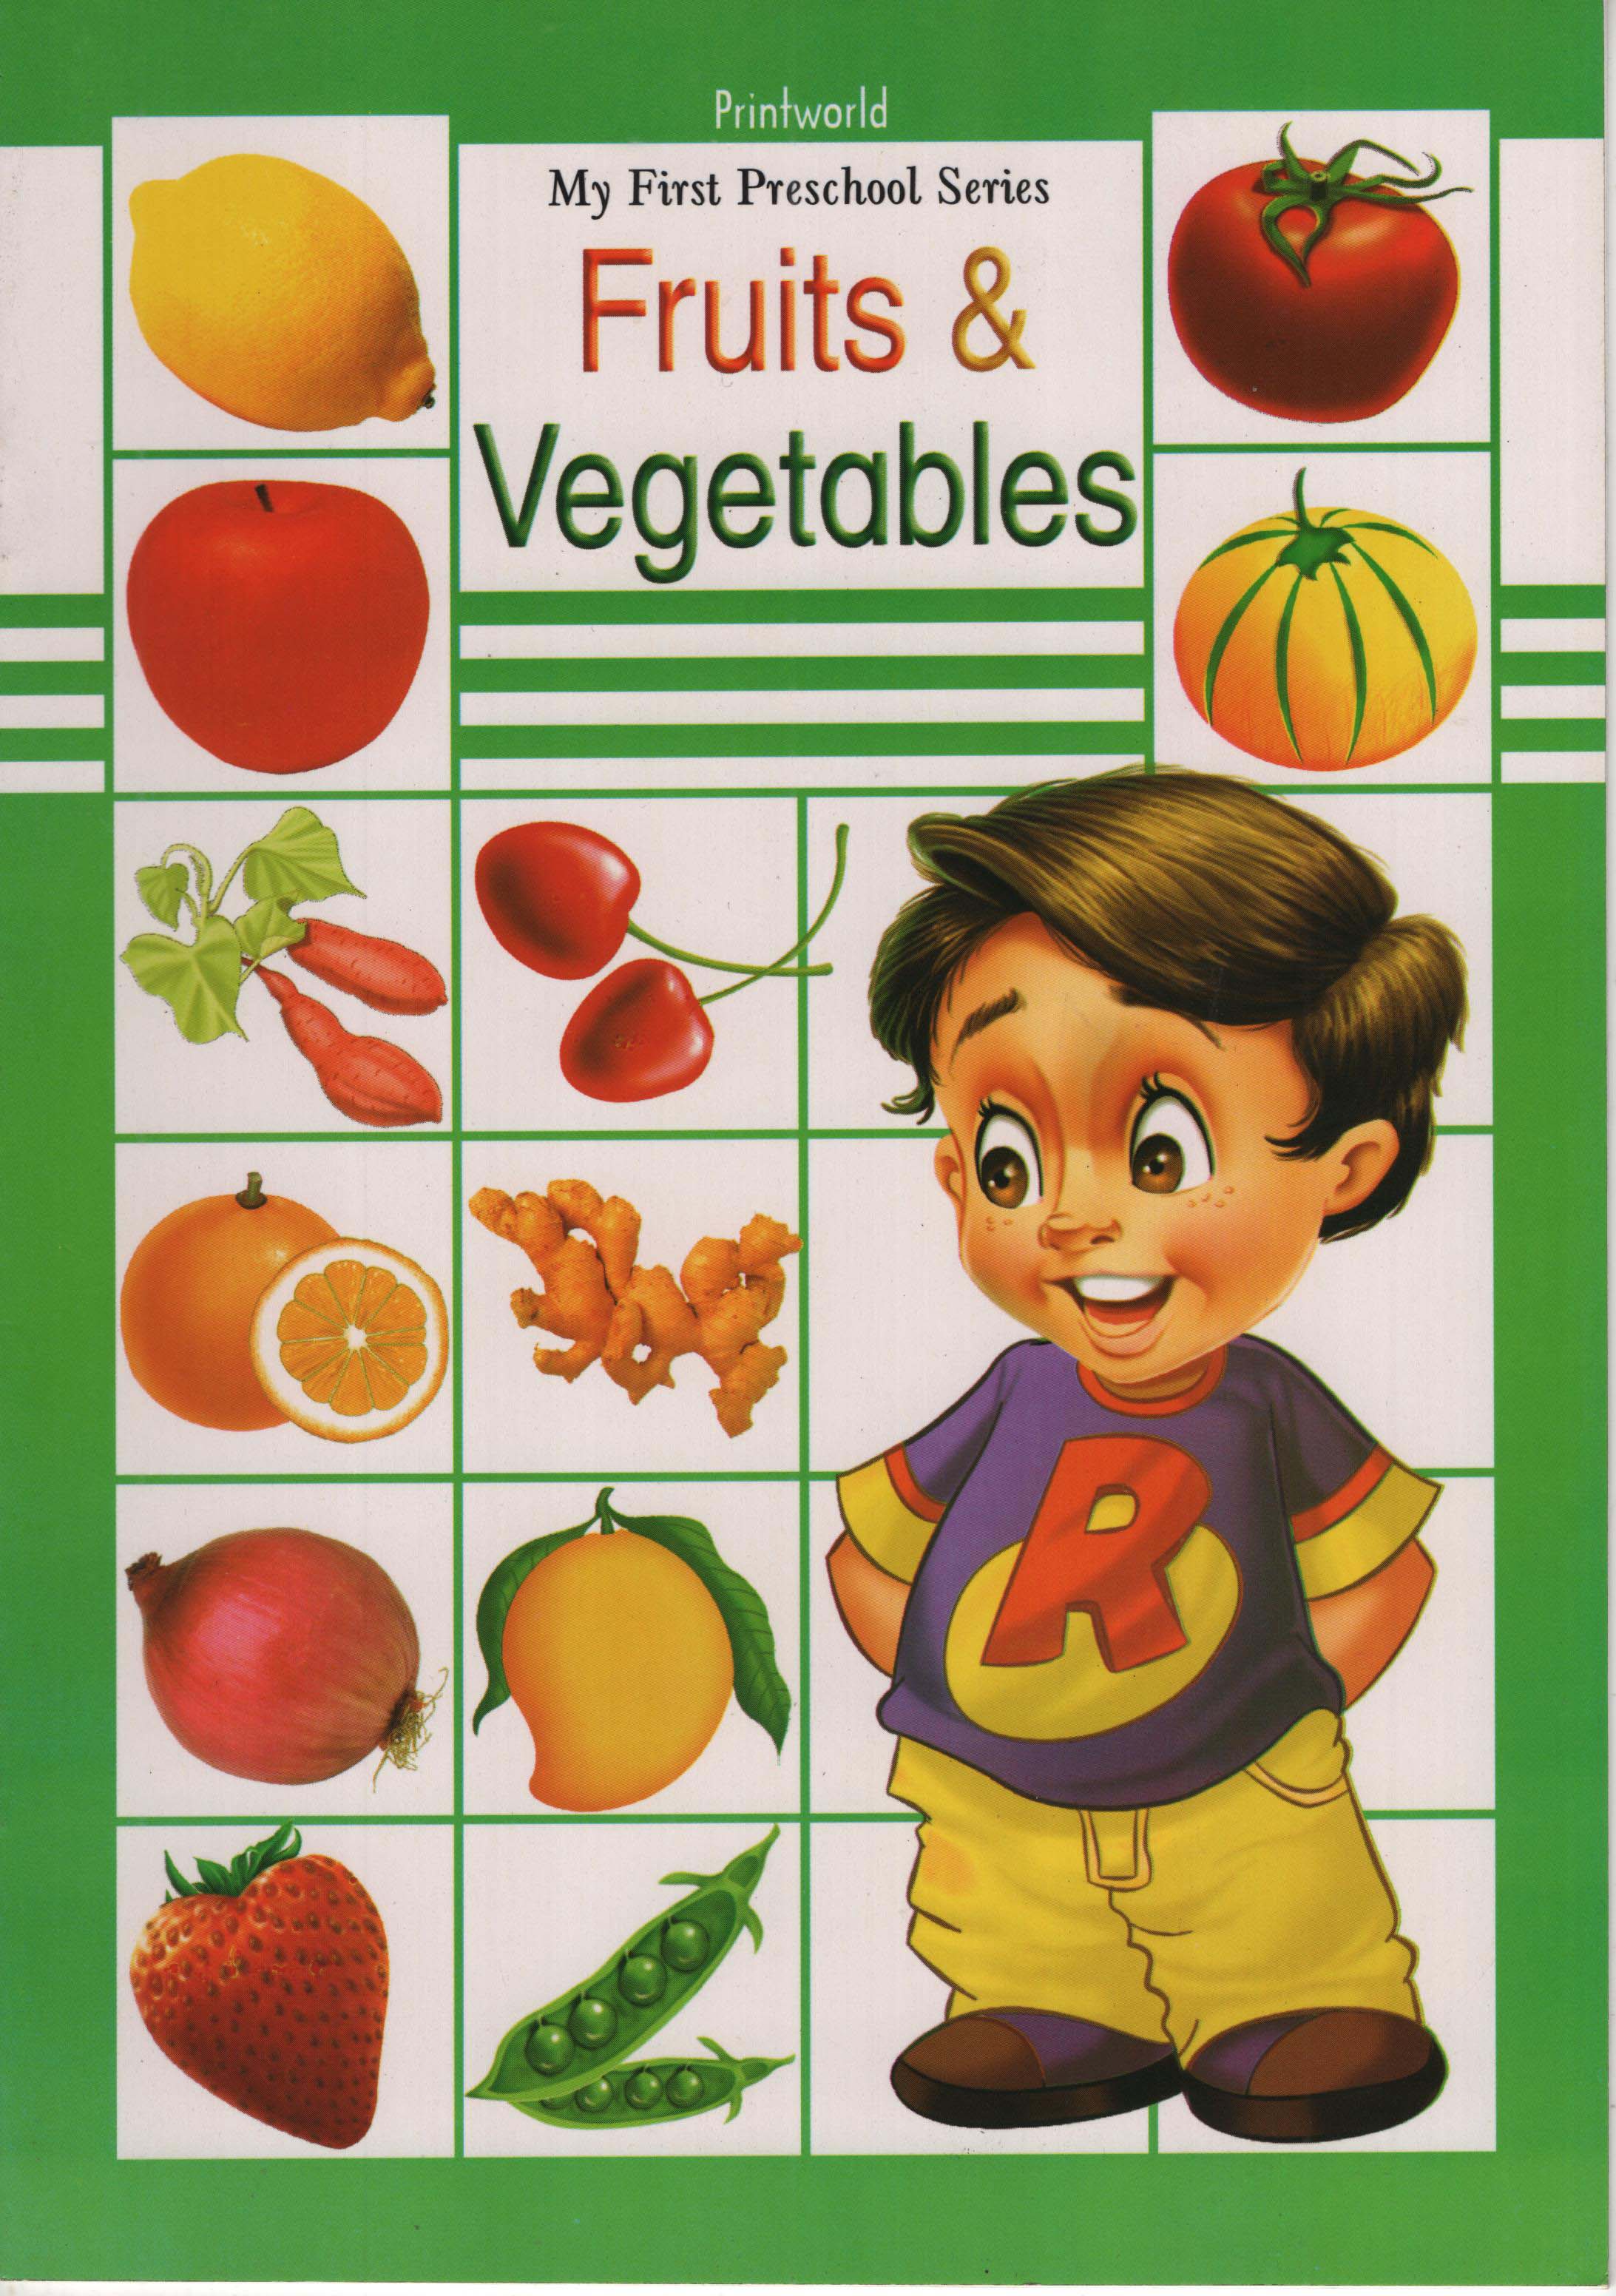 Printworld My First Preschool Series : Fruits and Vegetables